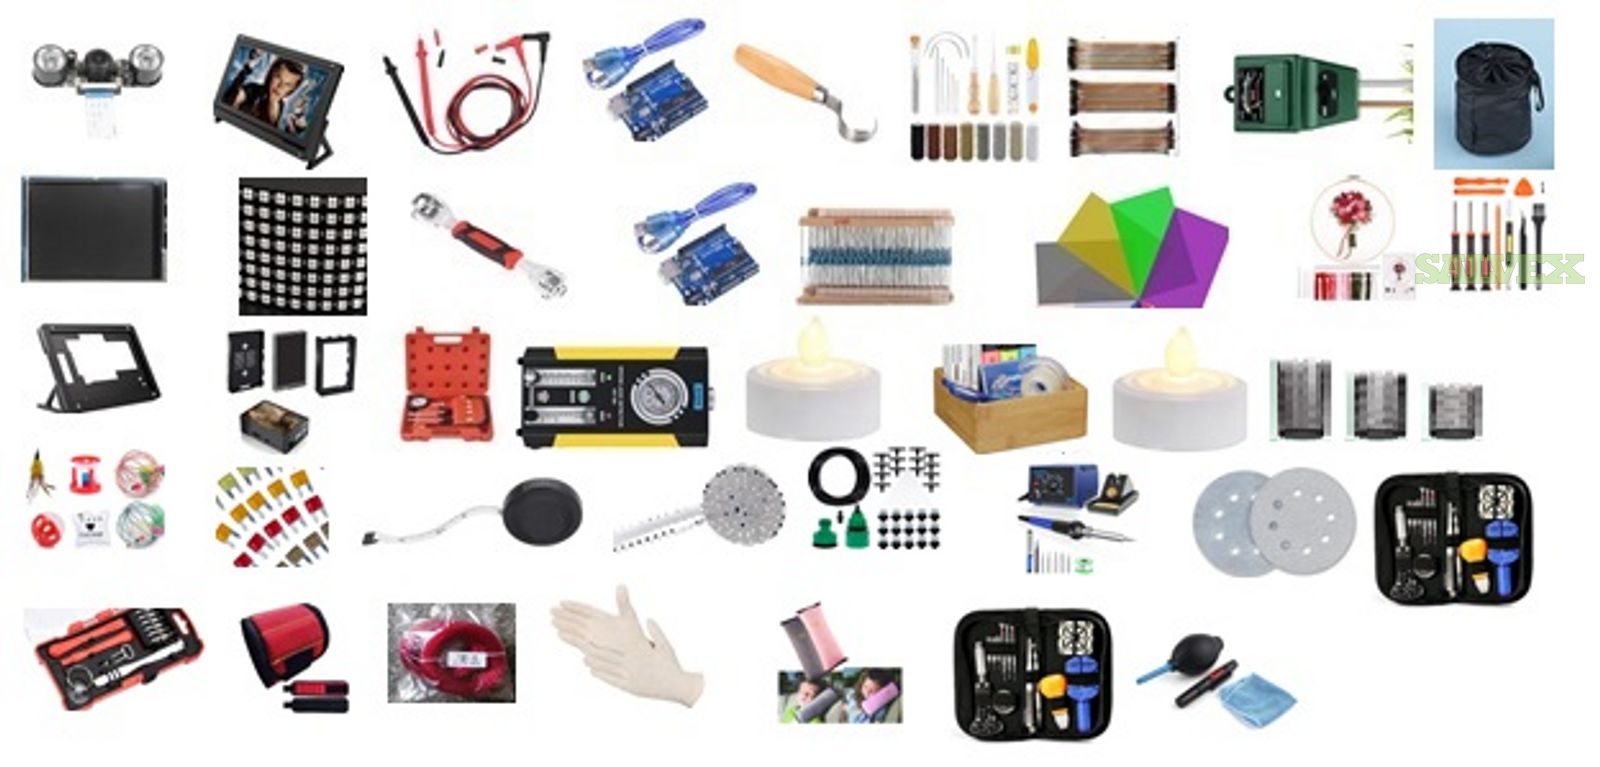 Miscellaneous Retail Items Toys, Video Recorders, LED Lights and More (23,595 Pcs)